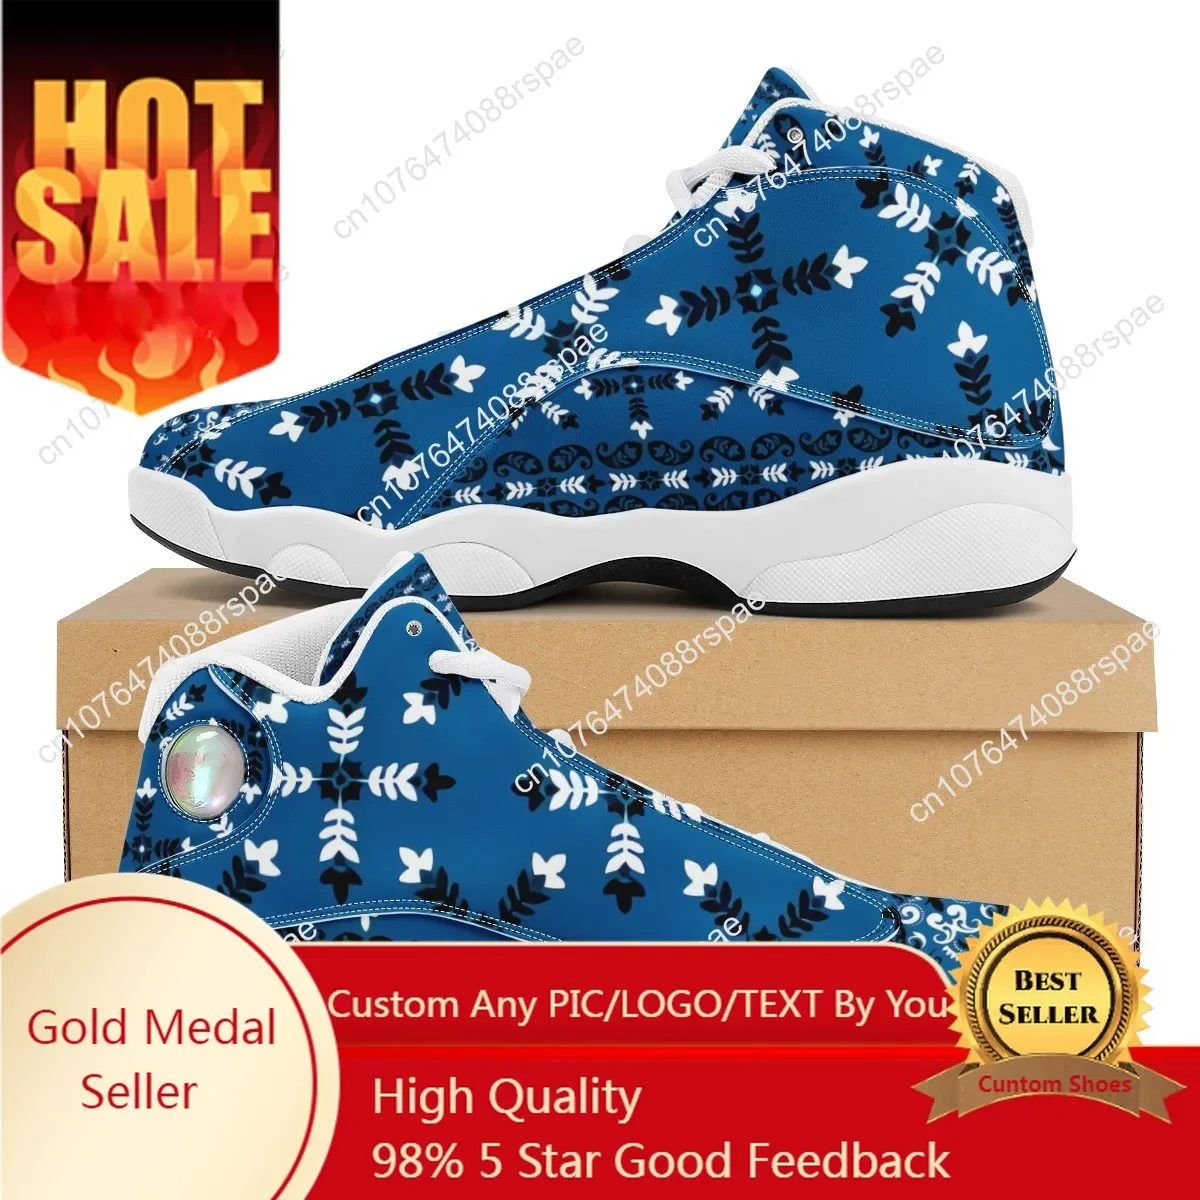 

Men's Basketball Shoes Breathable Cushioning Non-Slip Wearable Sports Shoes Gym Training Athletic Bandana Sneakers